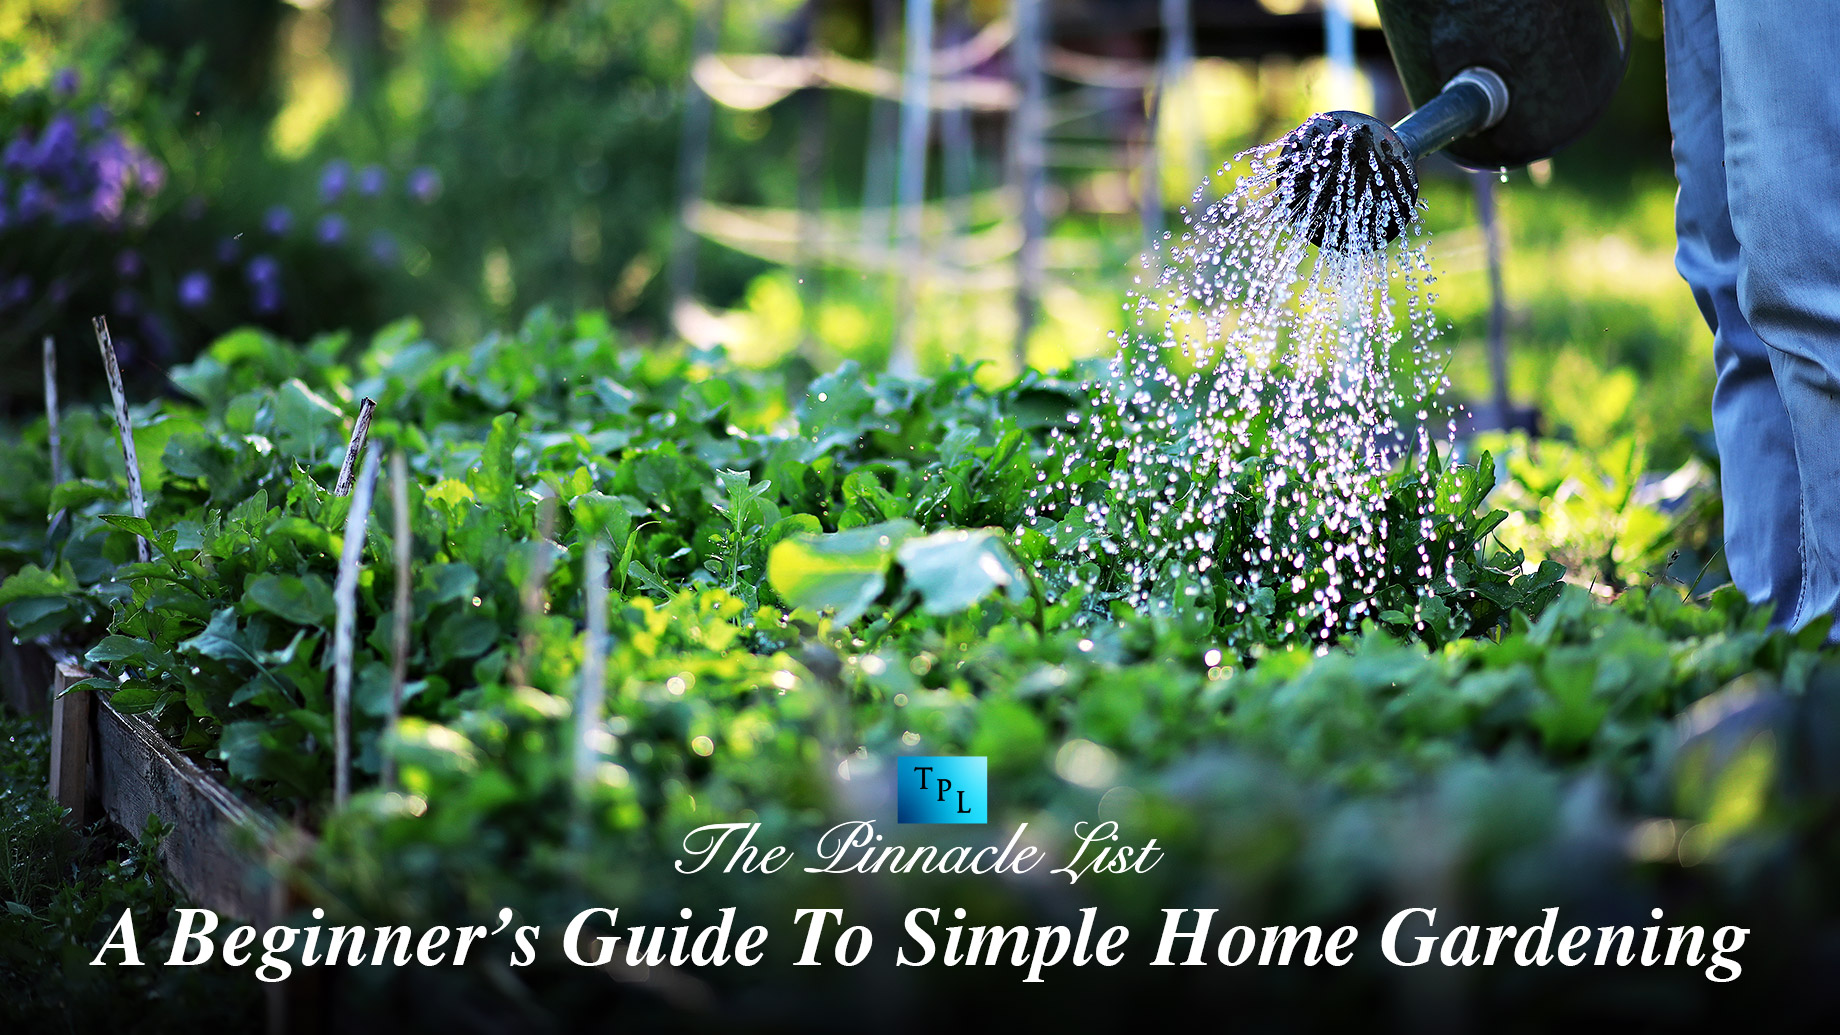 A Beginner’s Guide To Simple Home Gardening